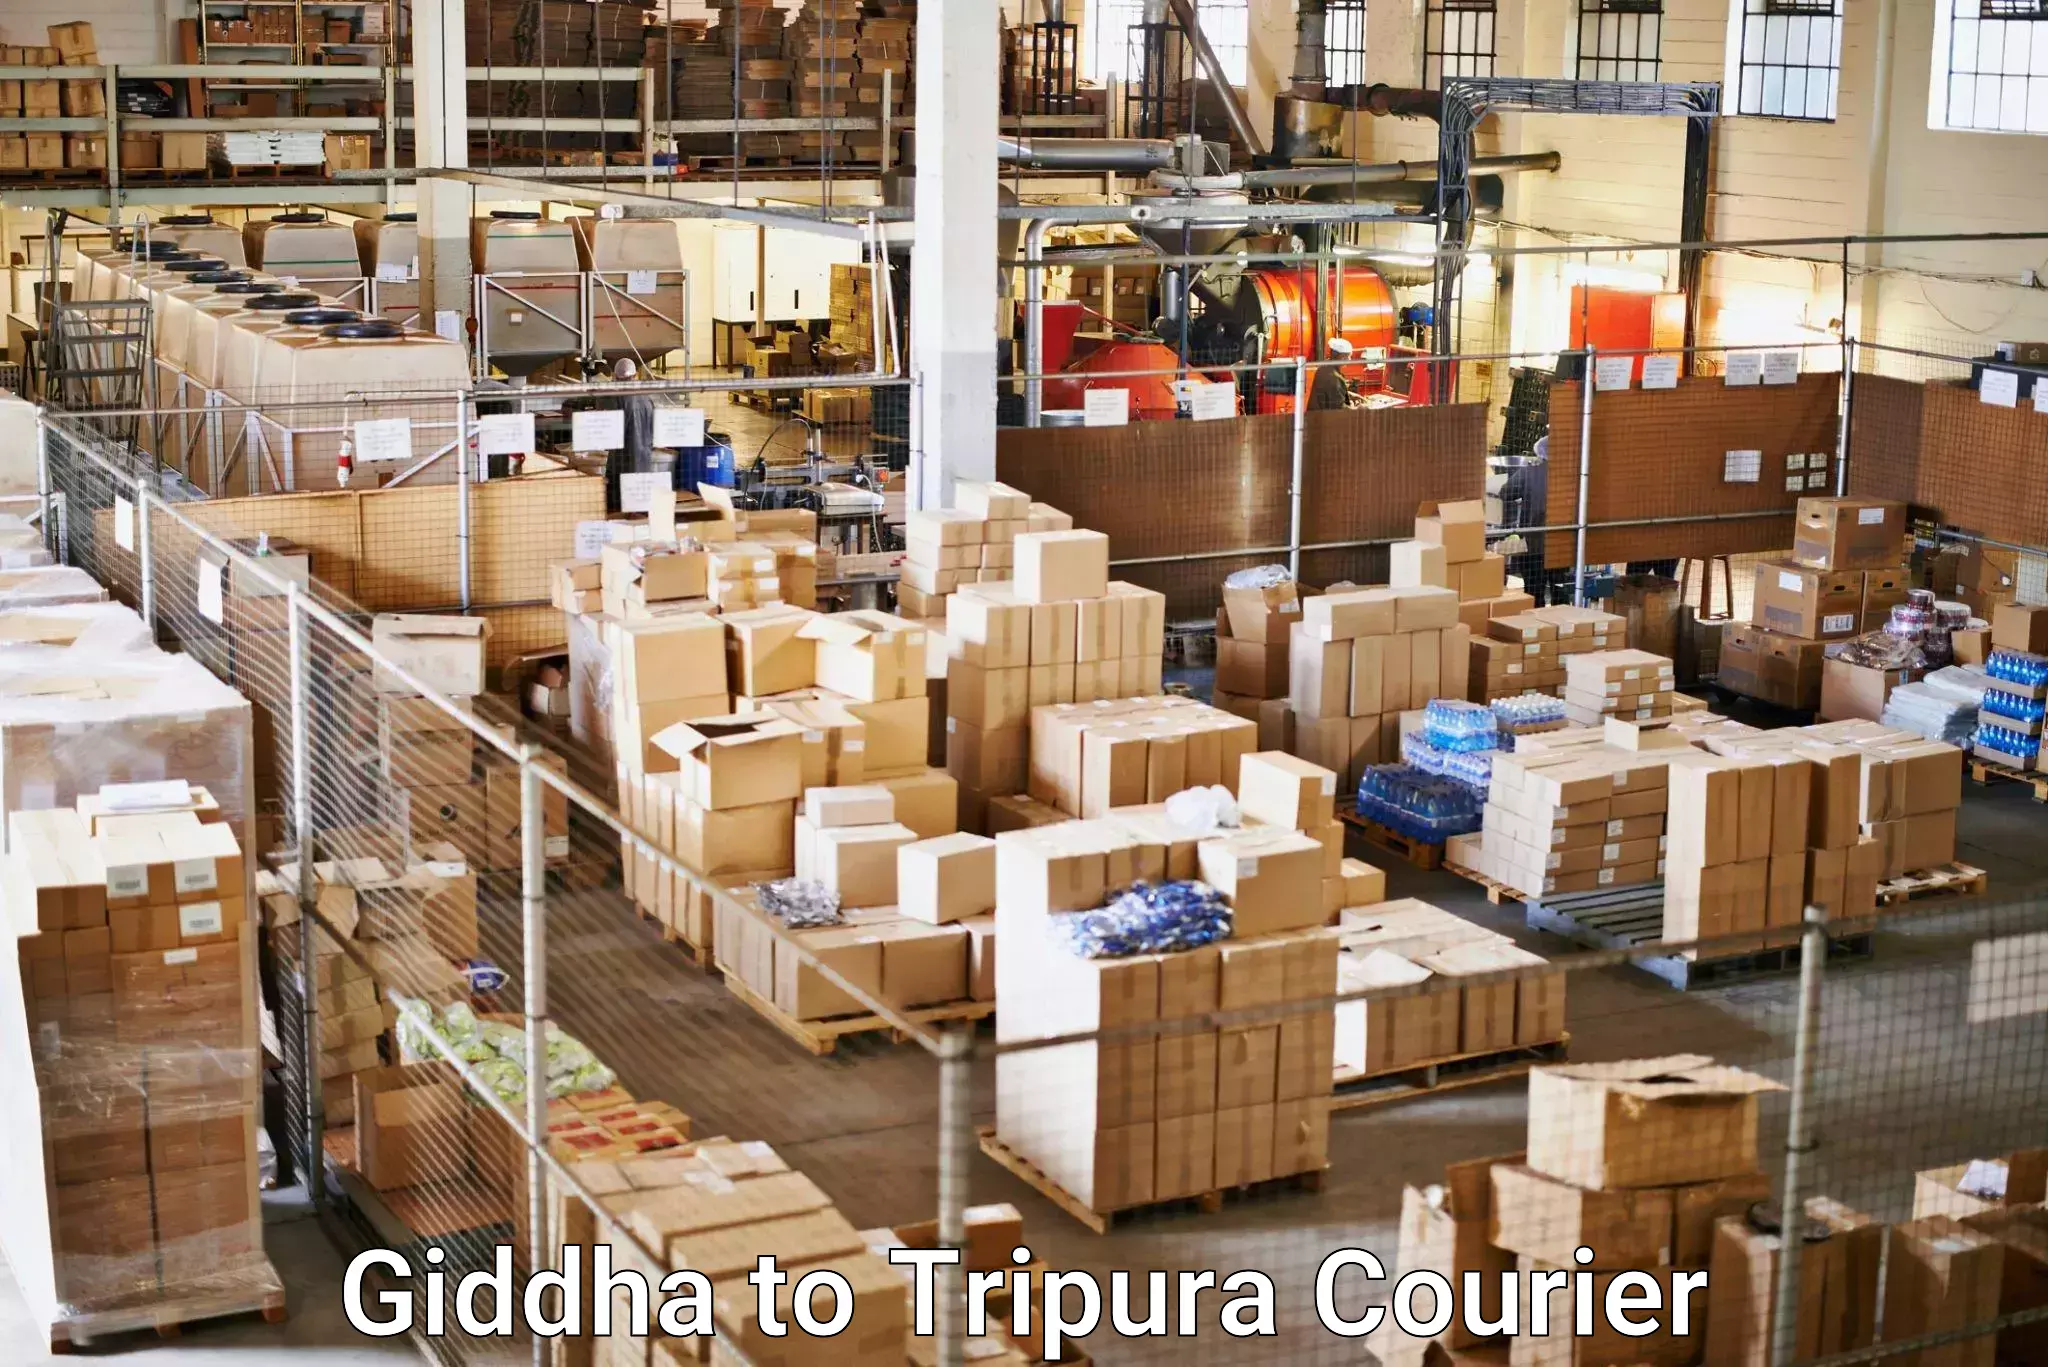 Cargo delivery service Giddha to Tripura